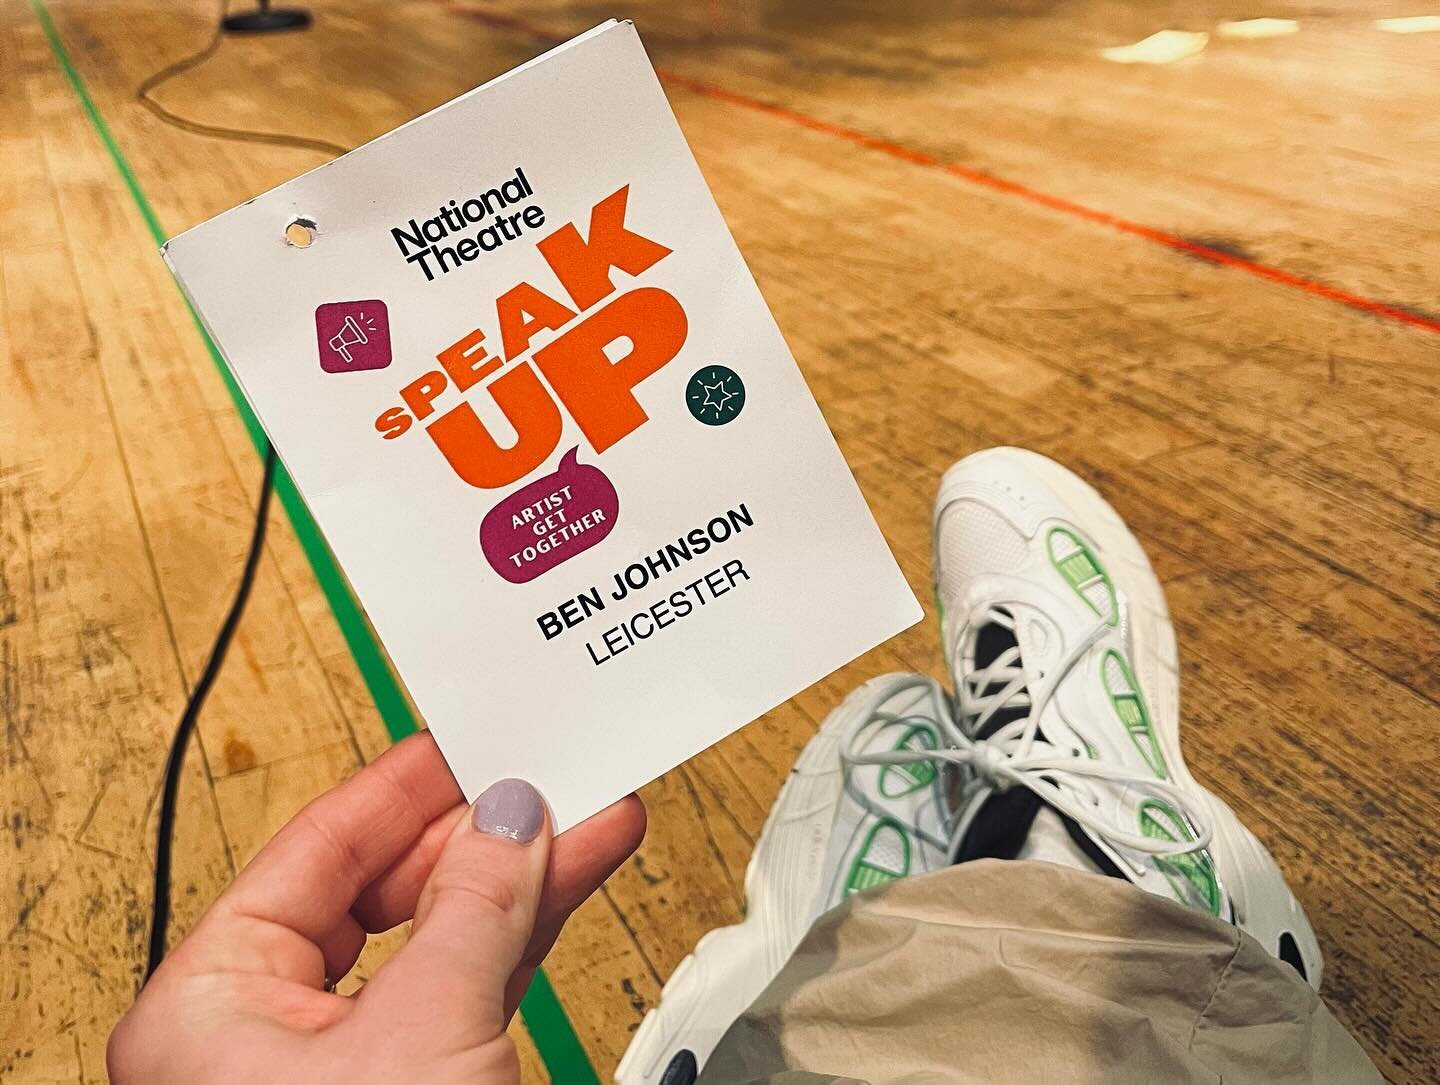 Thanks to @nationaltheatre for hosting two intense and inspiring days up in Stoke-On-Trent for us &lsquo;Speak-Up&rsquo; Artists. Proud to be a part of this project with so many other artists across the UK ✊🏼#ntspeakup